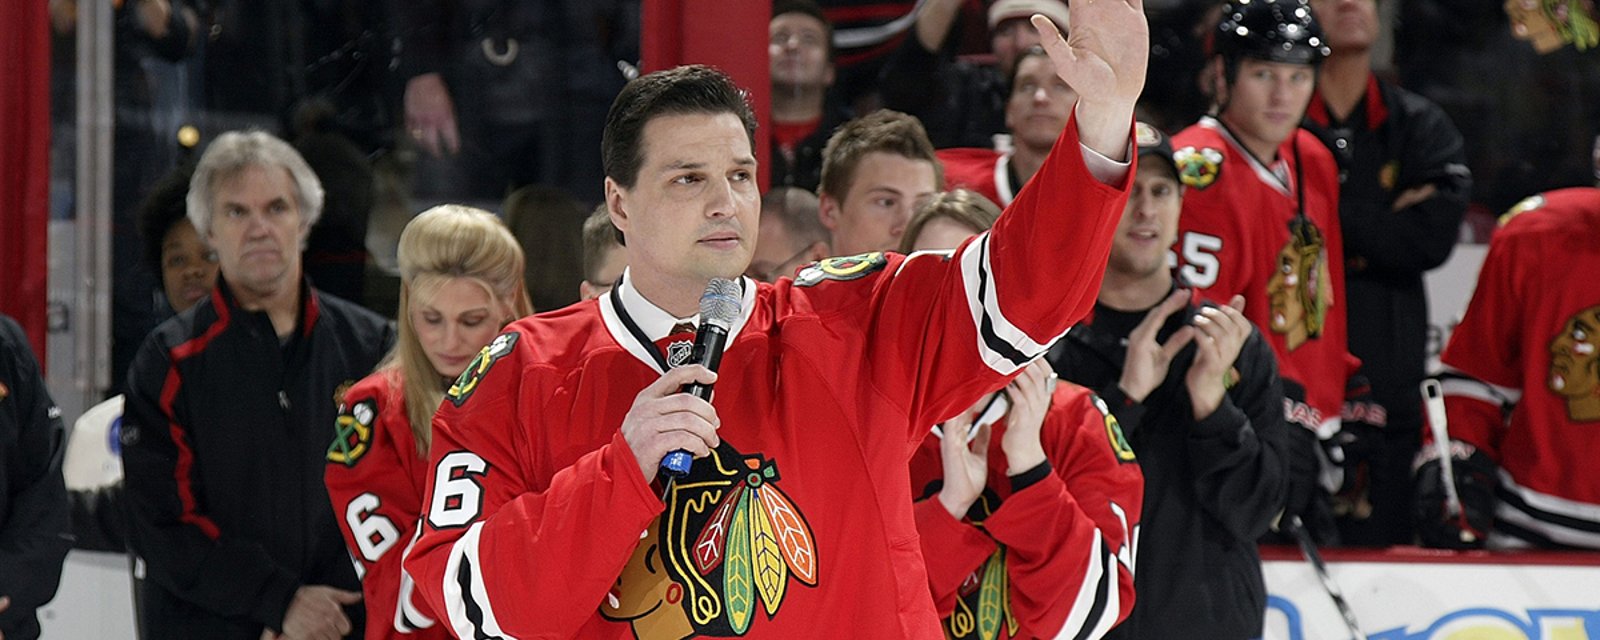 NBC analyst and cancer survivor Eddie Olczyk signs with the Blackhawks for “One More Shift”